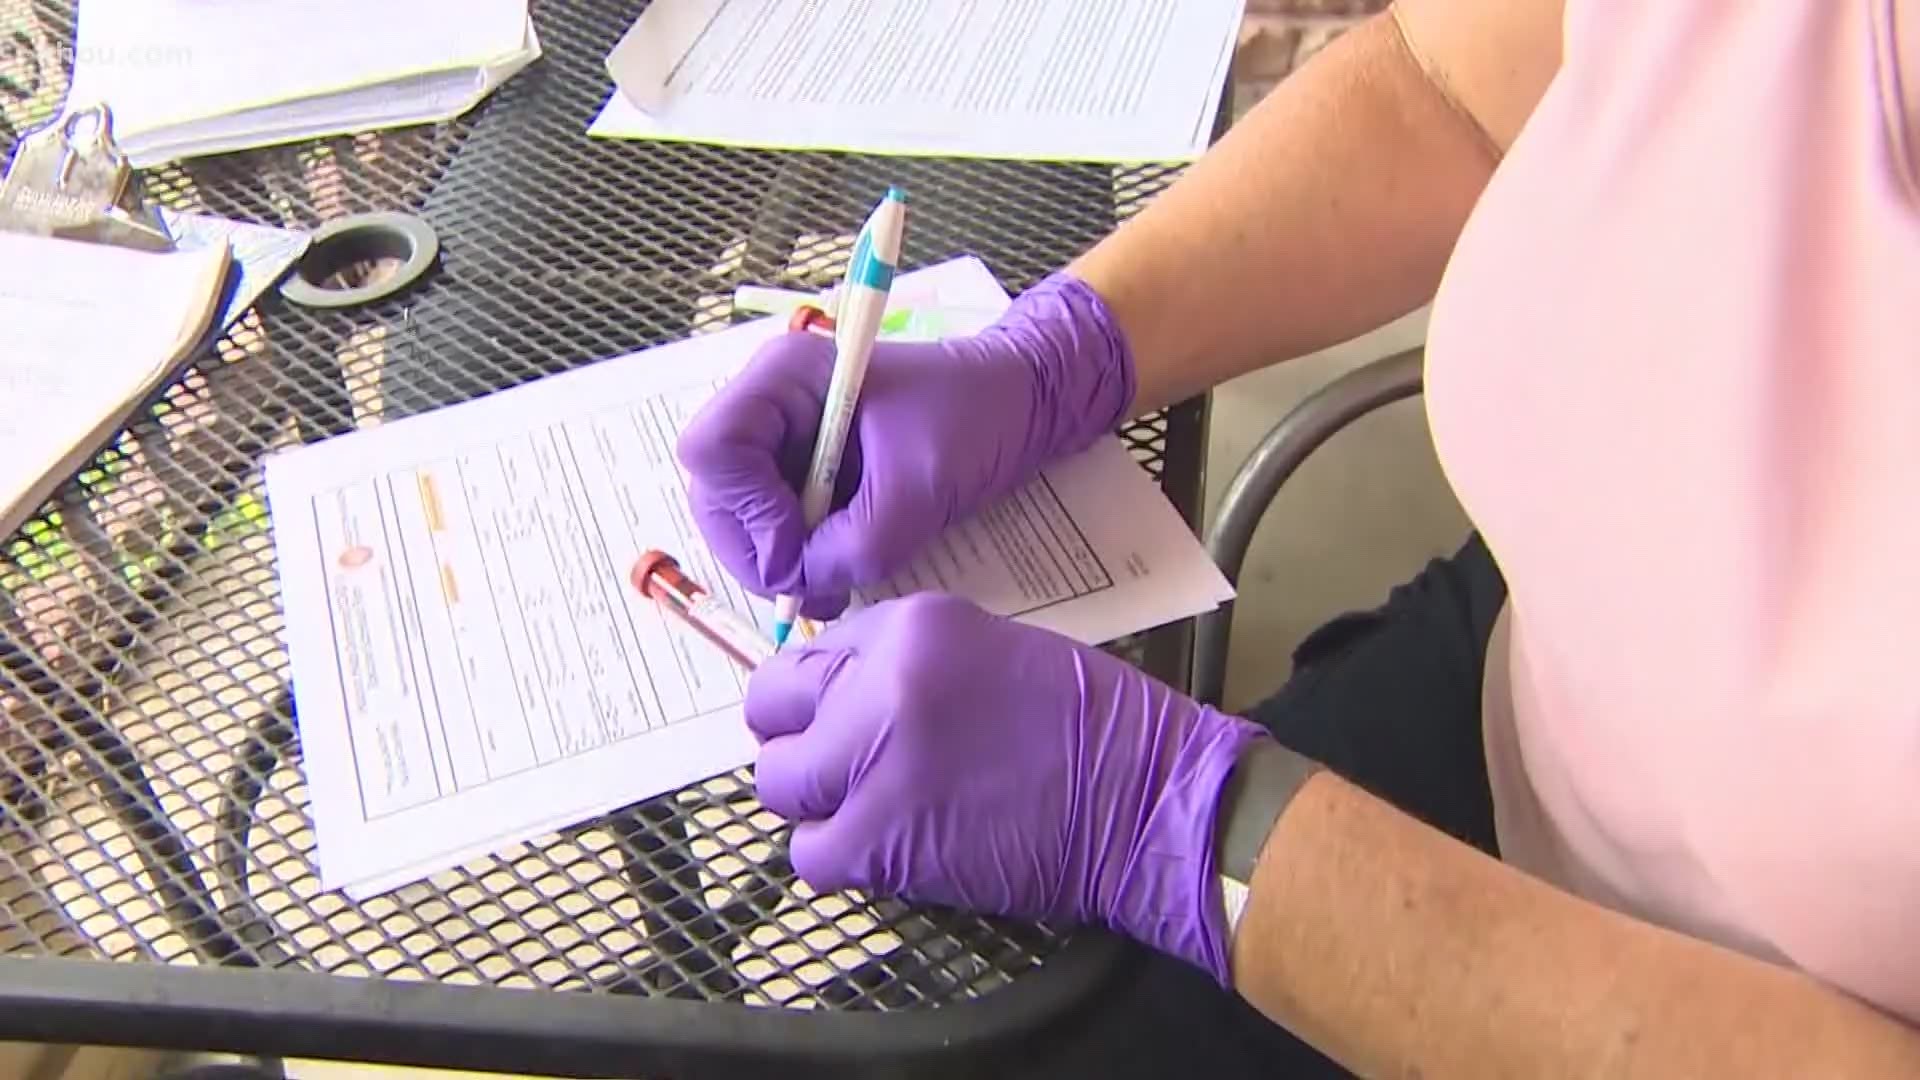 A survey by the Houston Health Department shows the number of Houstonians who've been infected with COVID-19 could be four times higher than their database shows.